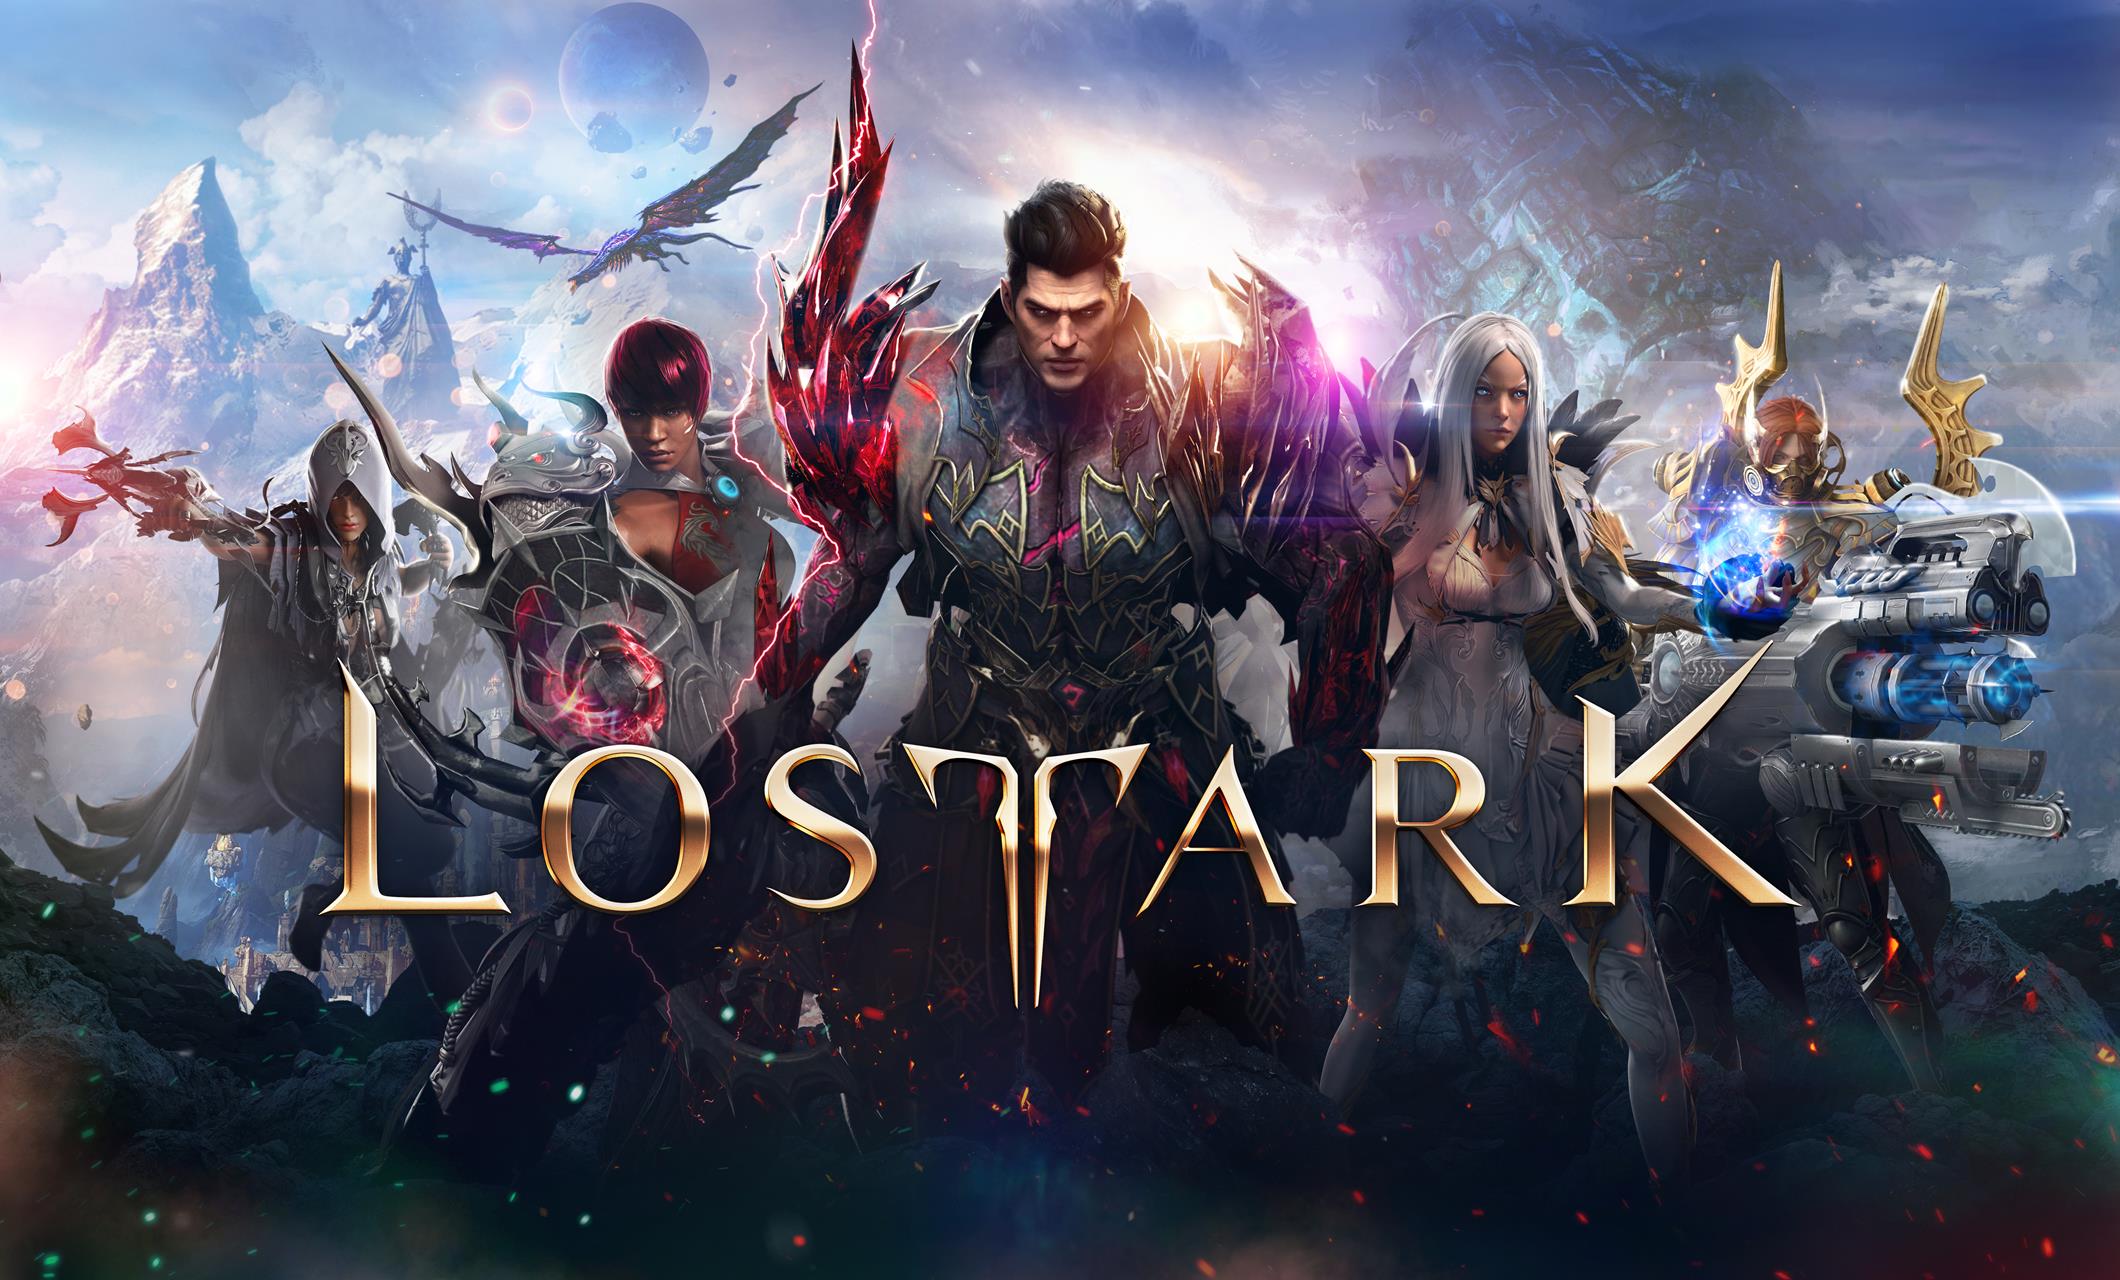 Image for Lost Ark has more than 20 million players worldwide